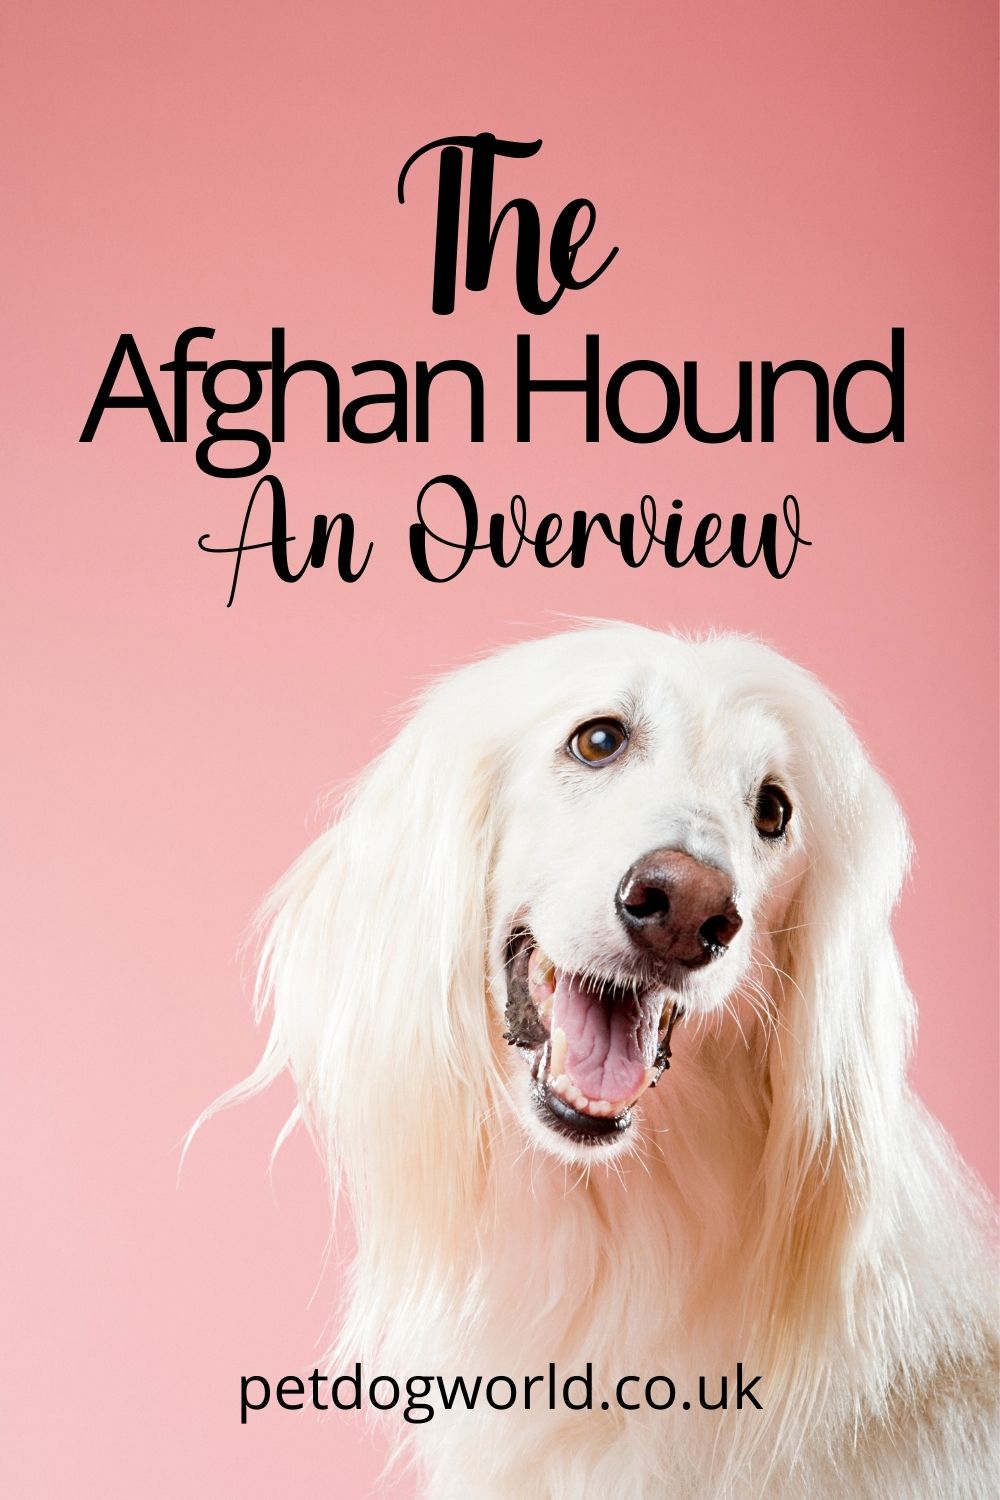 Let's take a look at the Afghan Hound to see if it's the perfect dog for you...